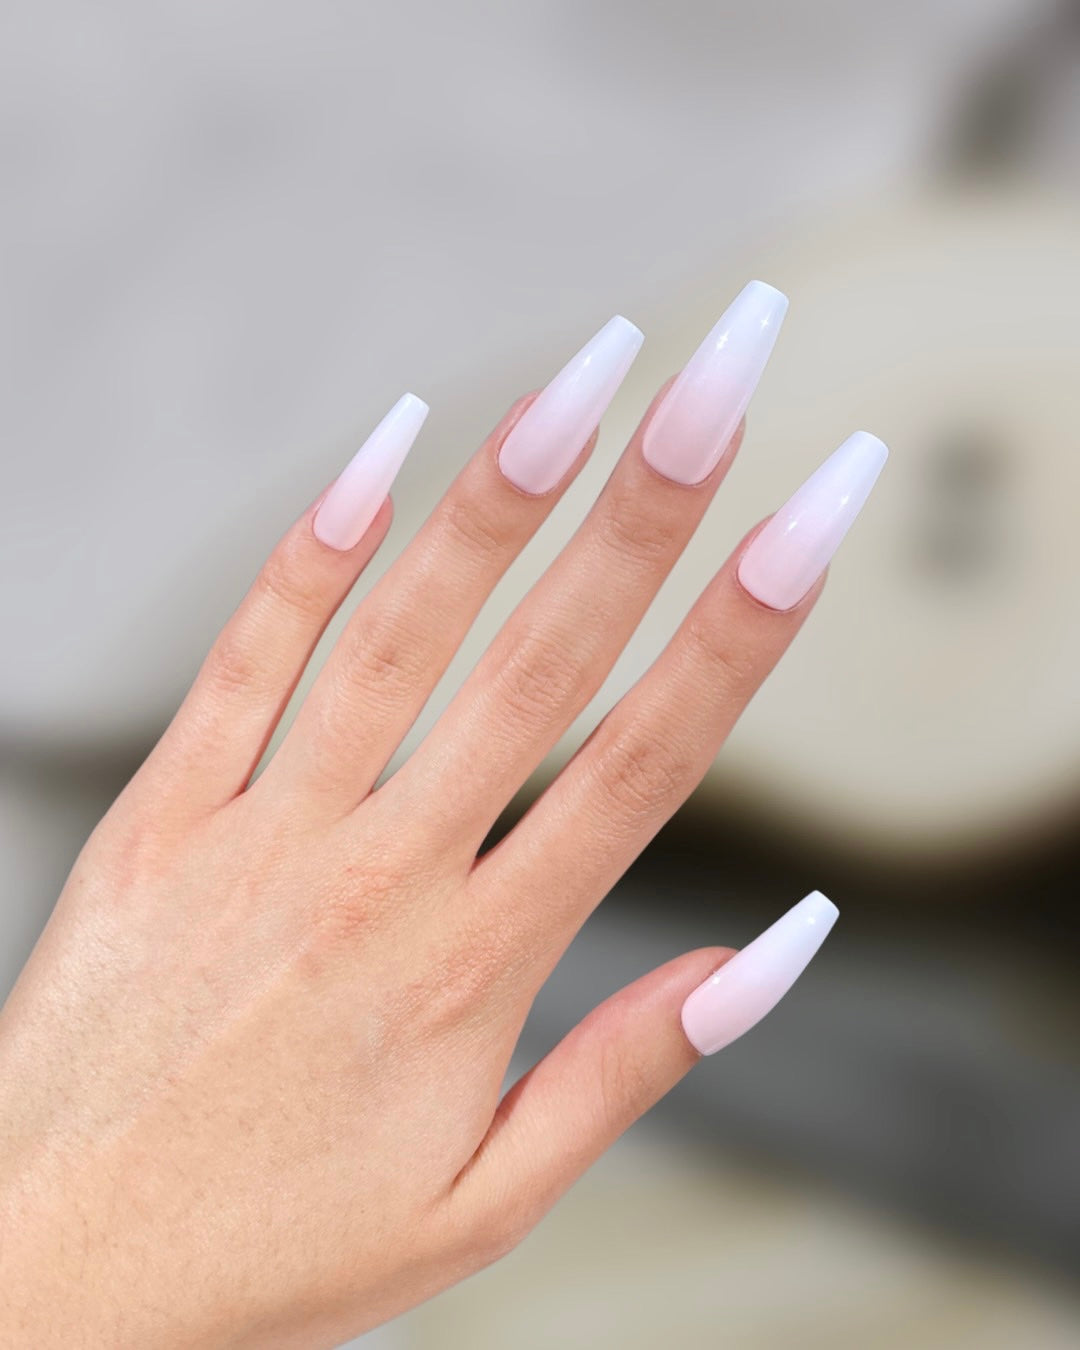 White Mother of Pearl – Pamper Nail Gallery